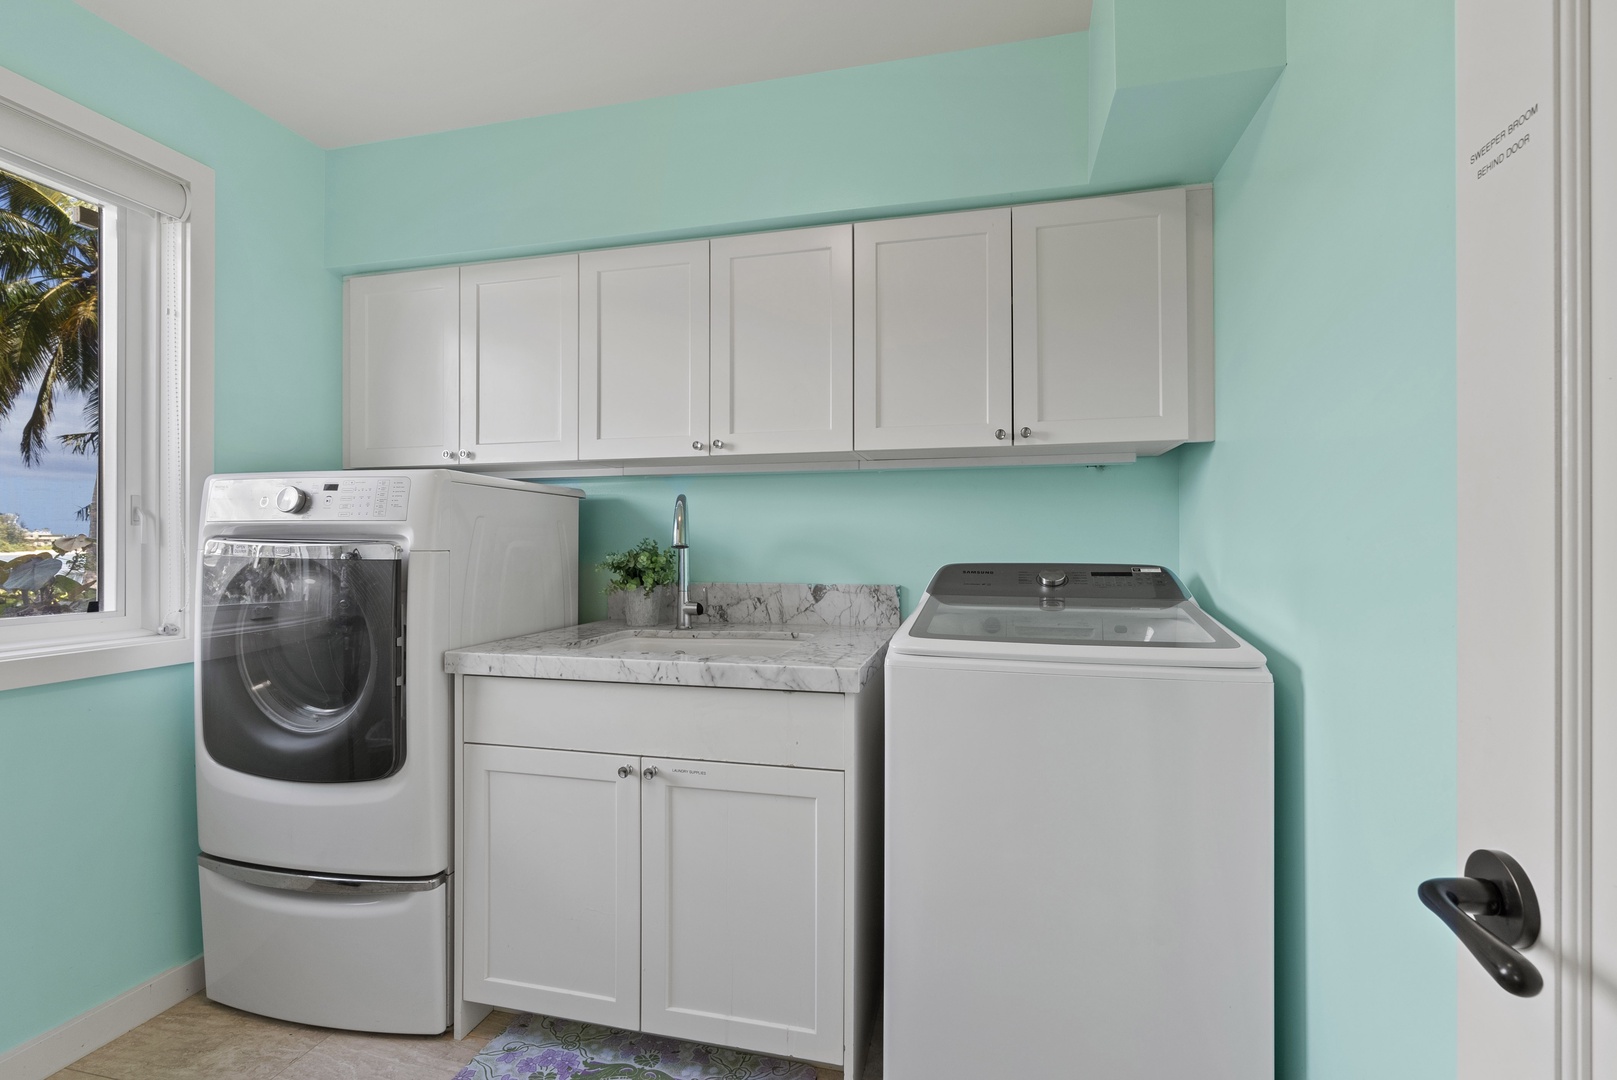 Waialua Vacation Rentals, Waialua Beachfront Estate - Full Laundry room with washer, dryer and sink